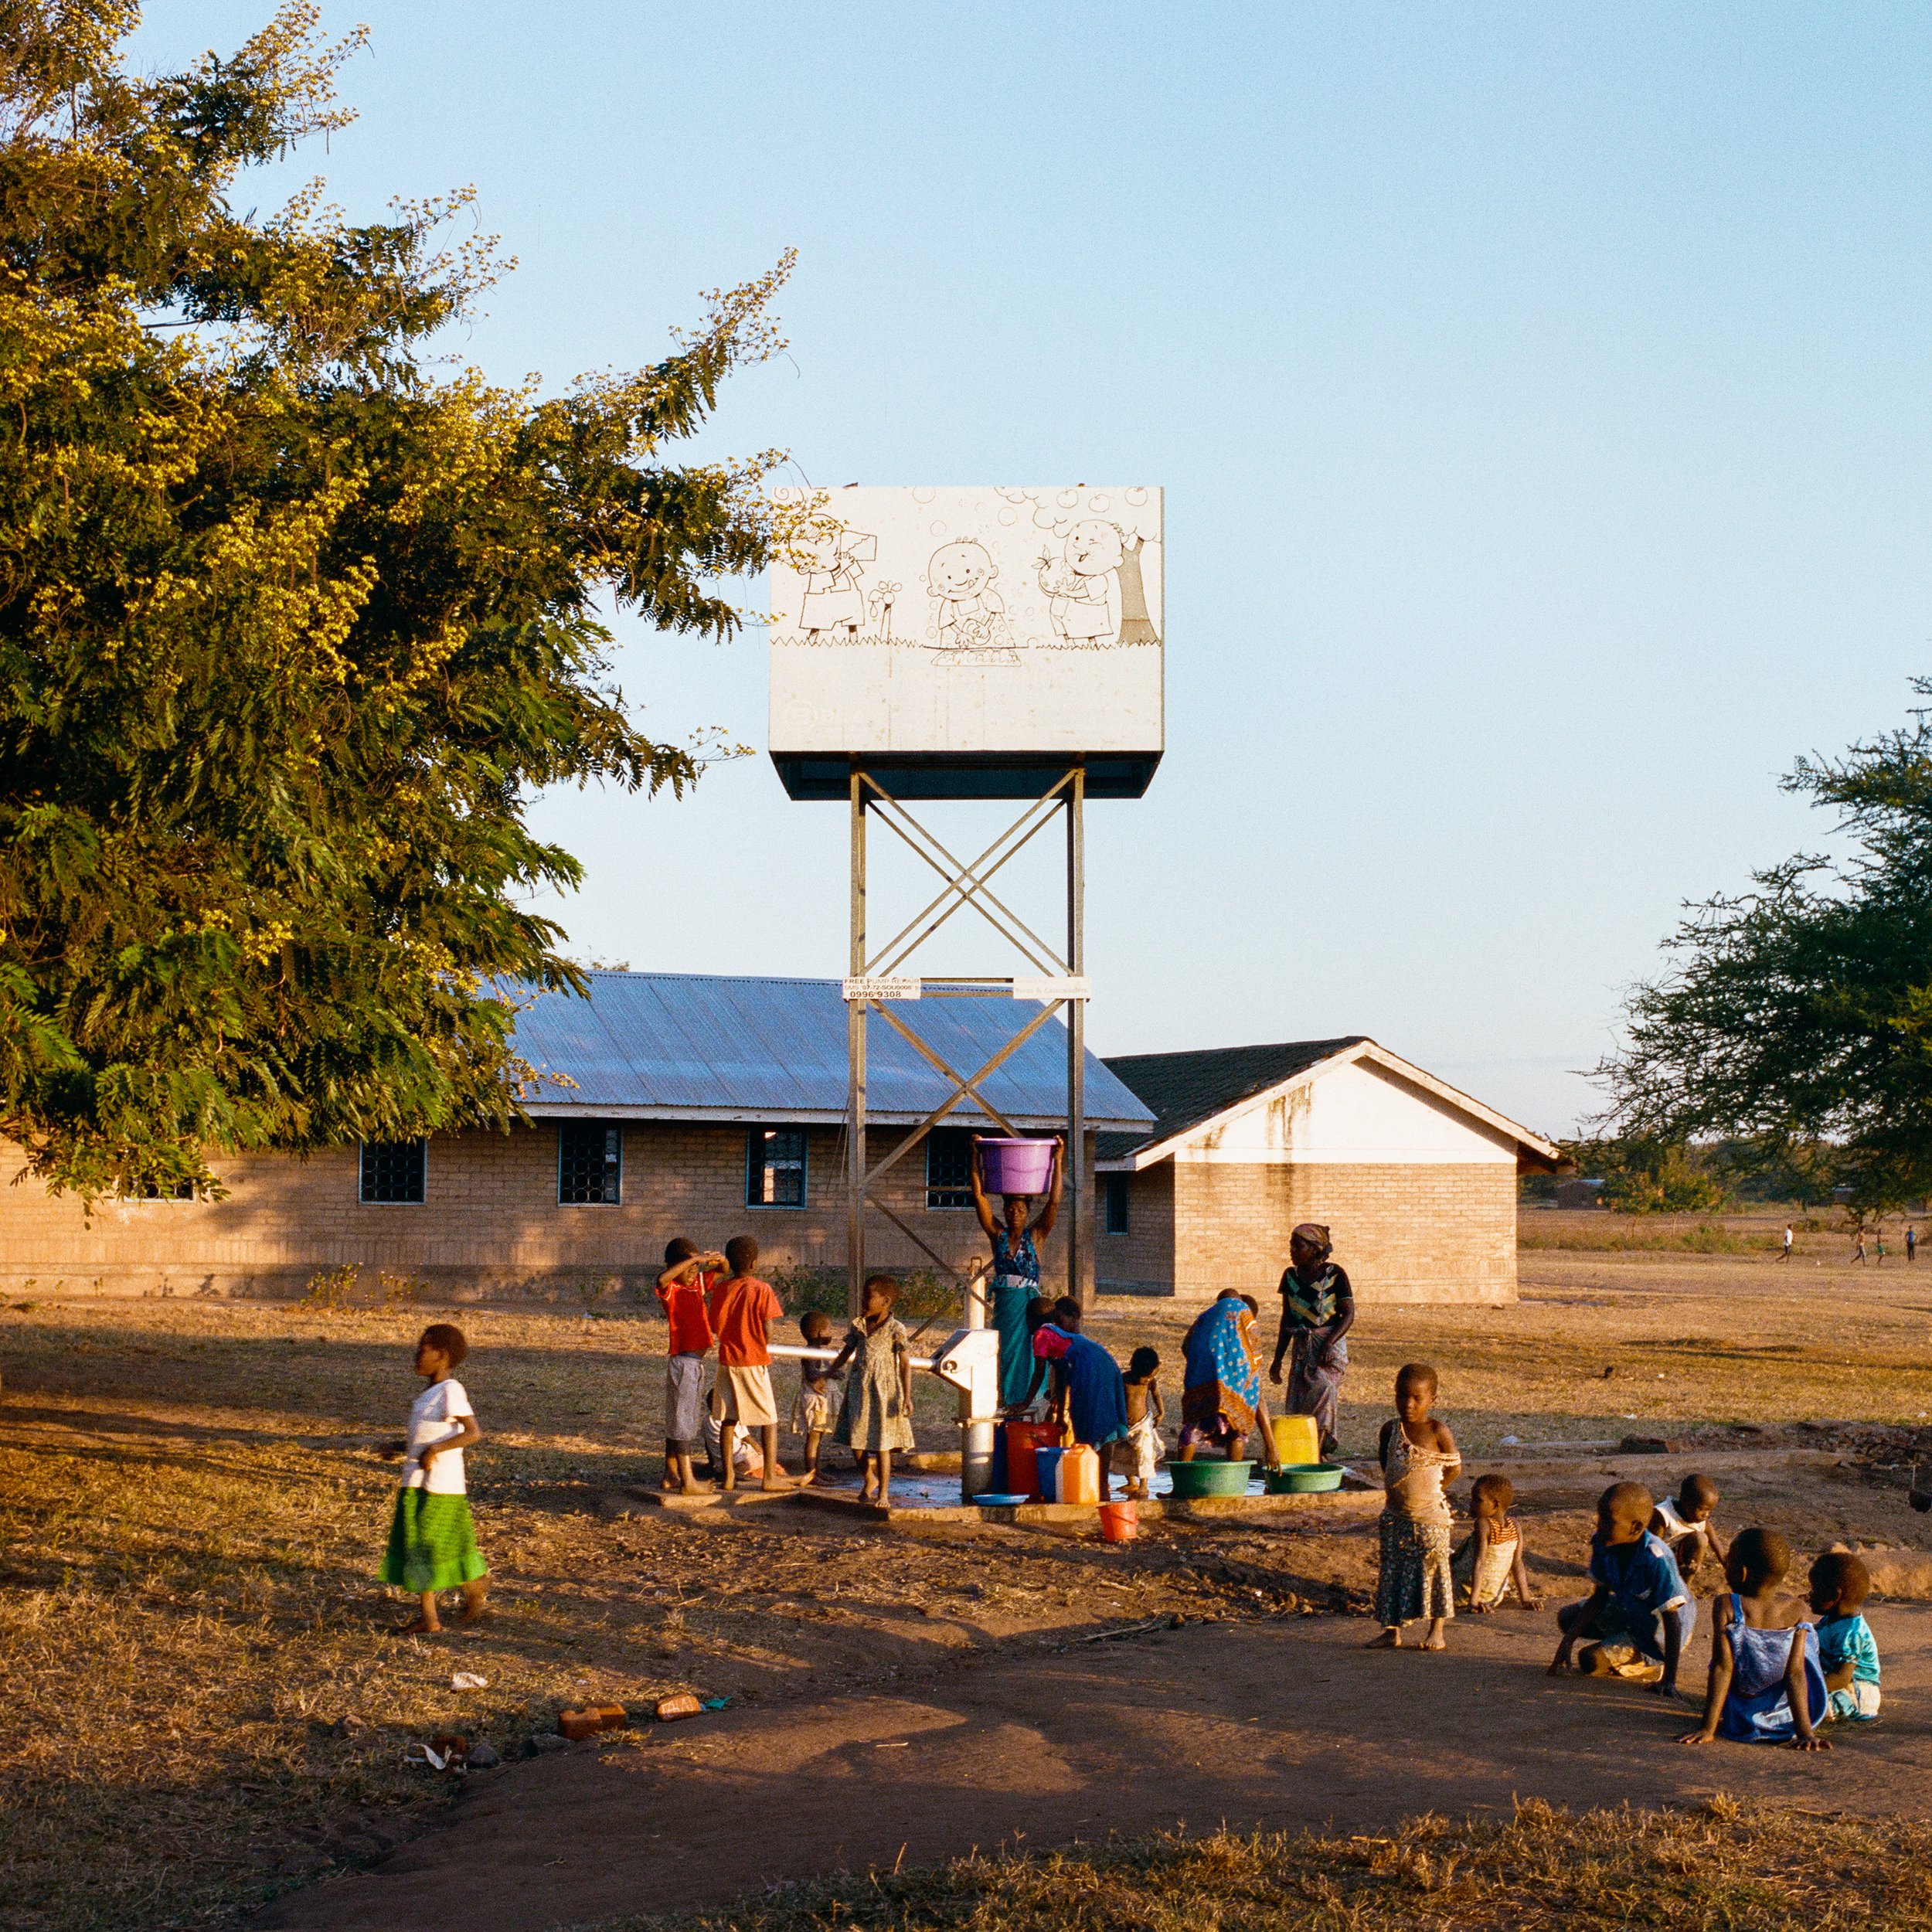  Empty, unused water tower from the site of a broken PlayPump. Thabwa Primary School in Thabwa, Chikhwawa District. Photographed June 9, 2015. The people getting water underneath the tower are using a handpump that does not require use of the tower. 